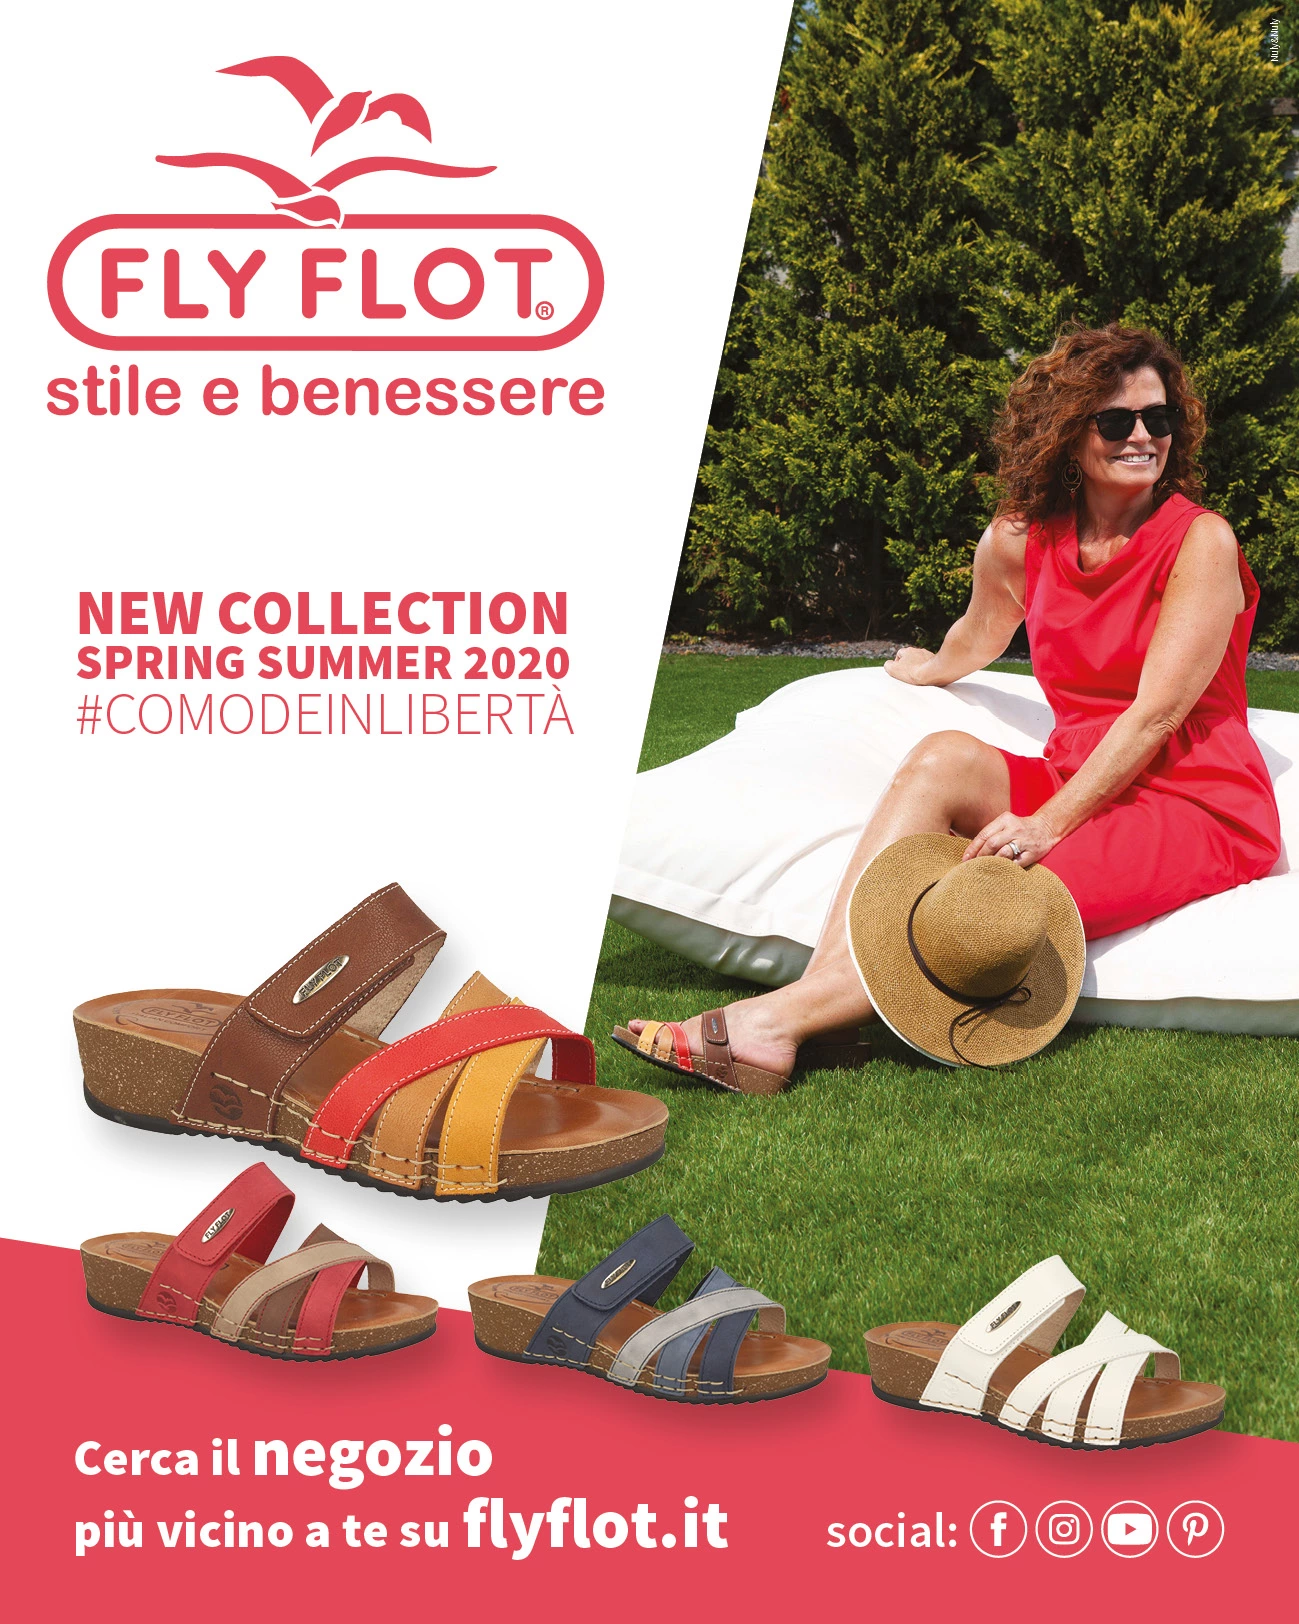 fly flot new collection